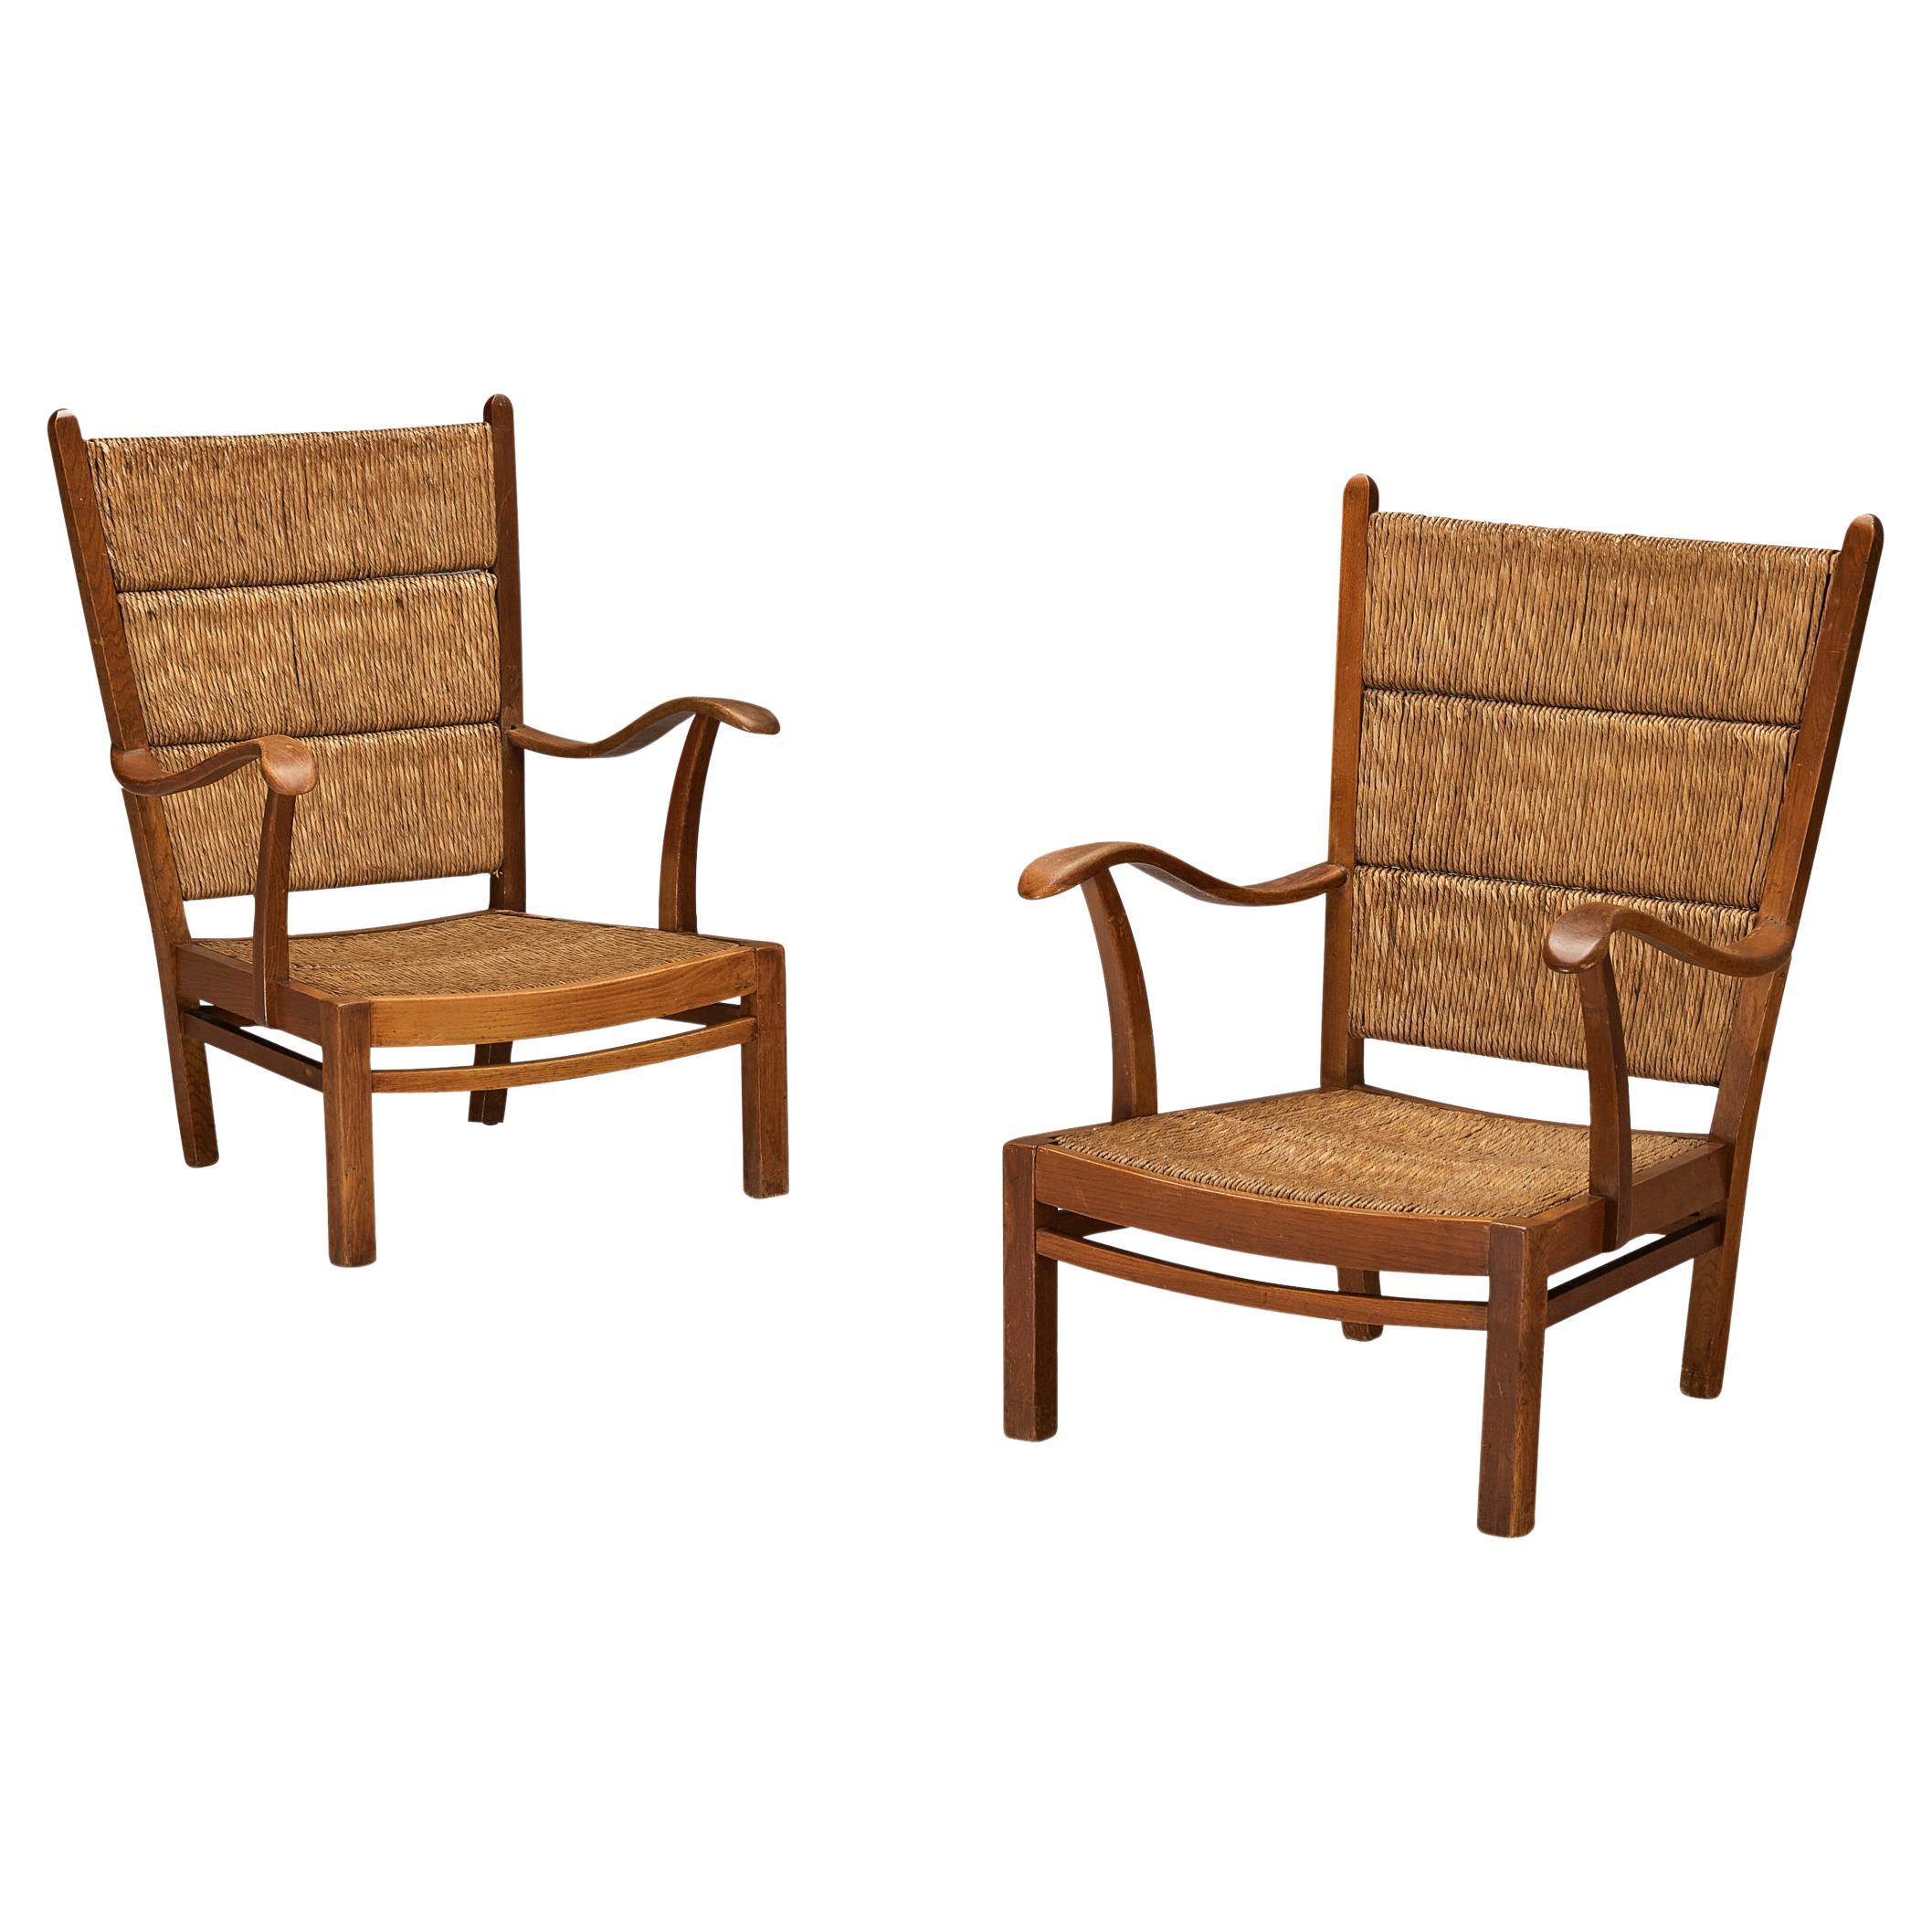 Pair of Dutch Lounge Chairs in Woven Straw and Wood 